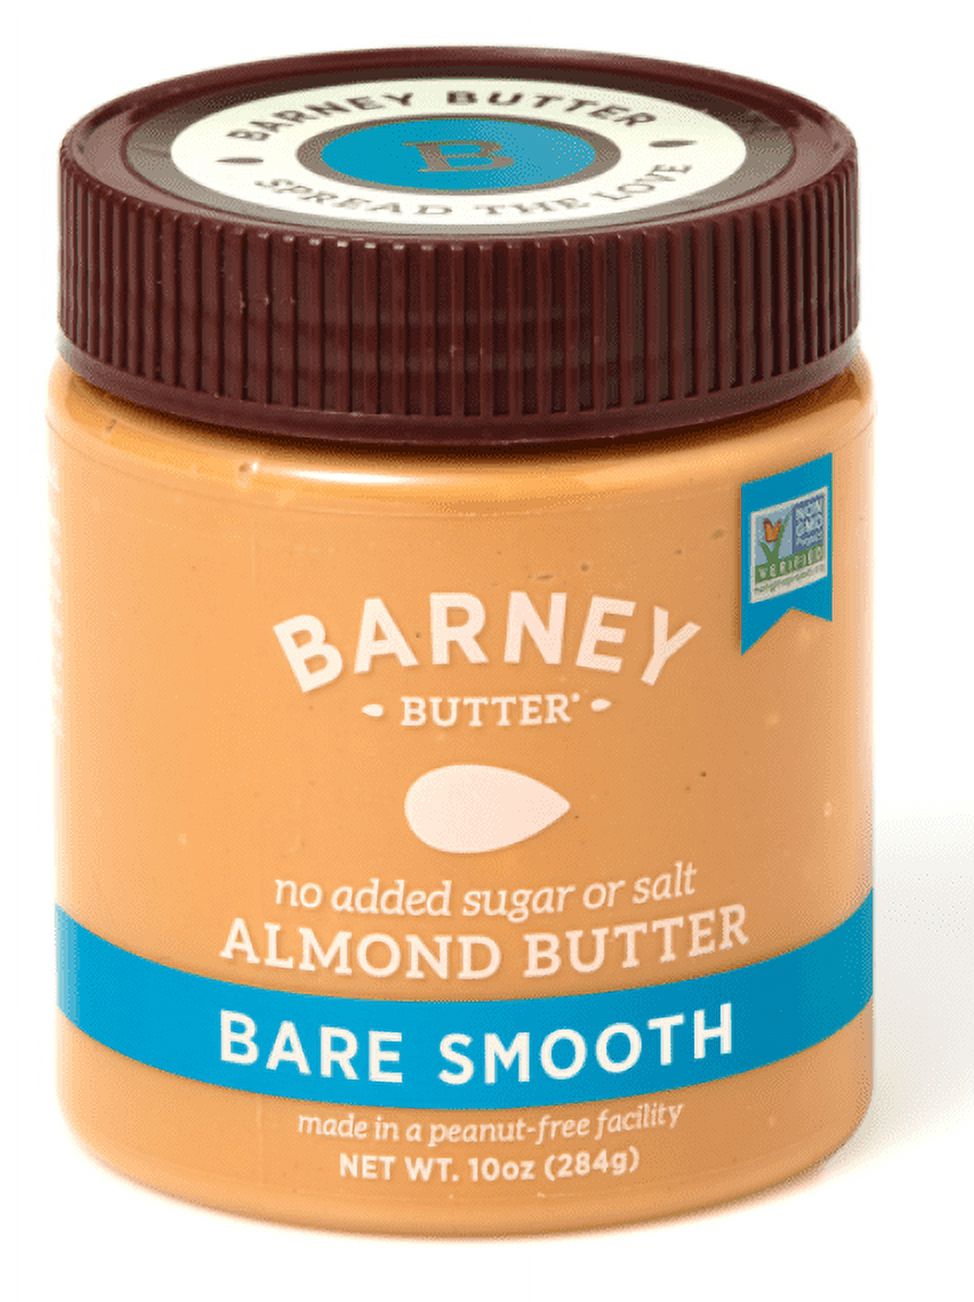 Barney Butter Bare Smooth Almond Butter, 10 oz - image 1 of 6